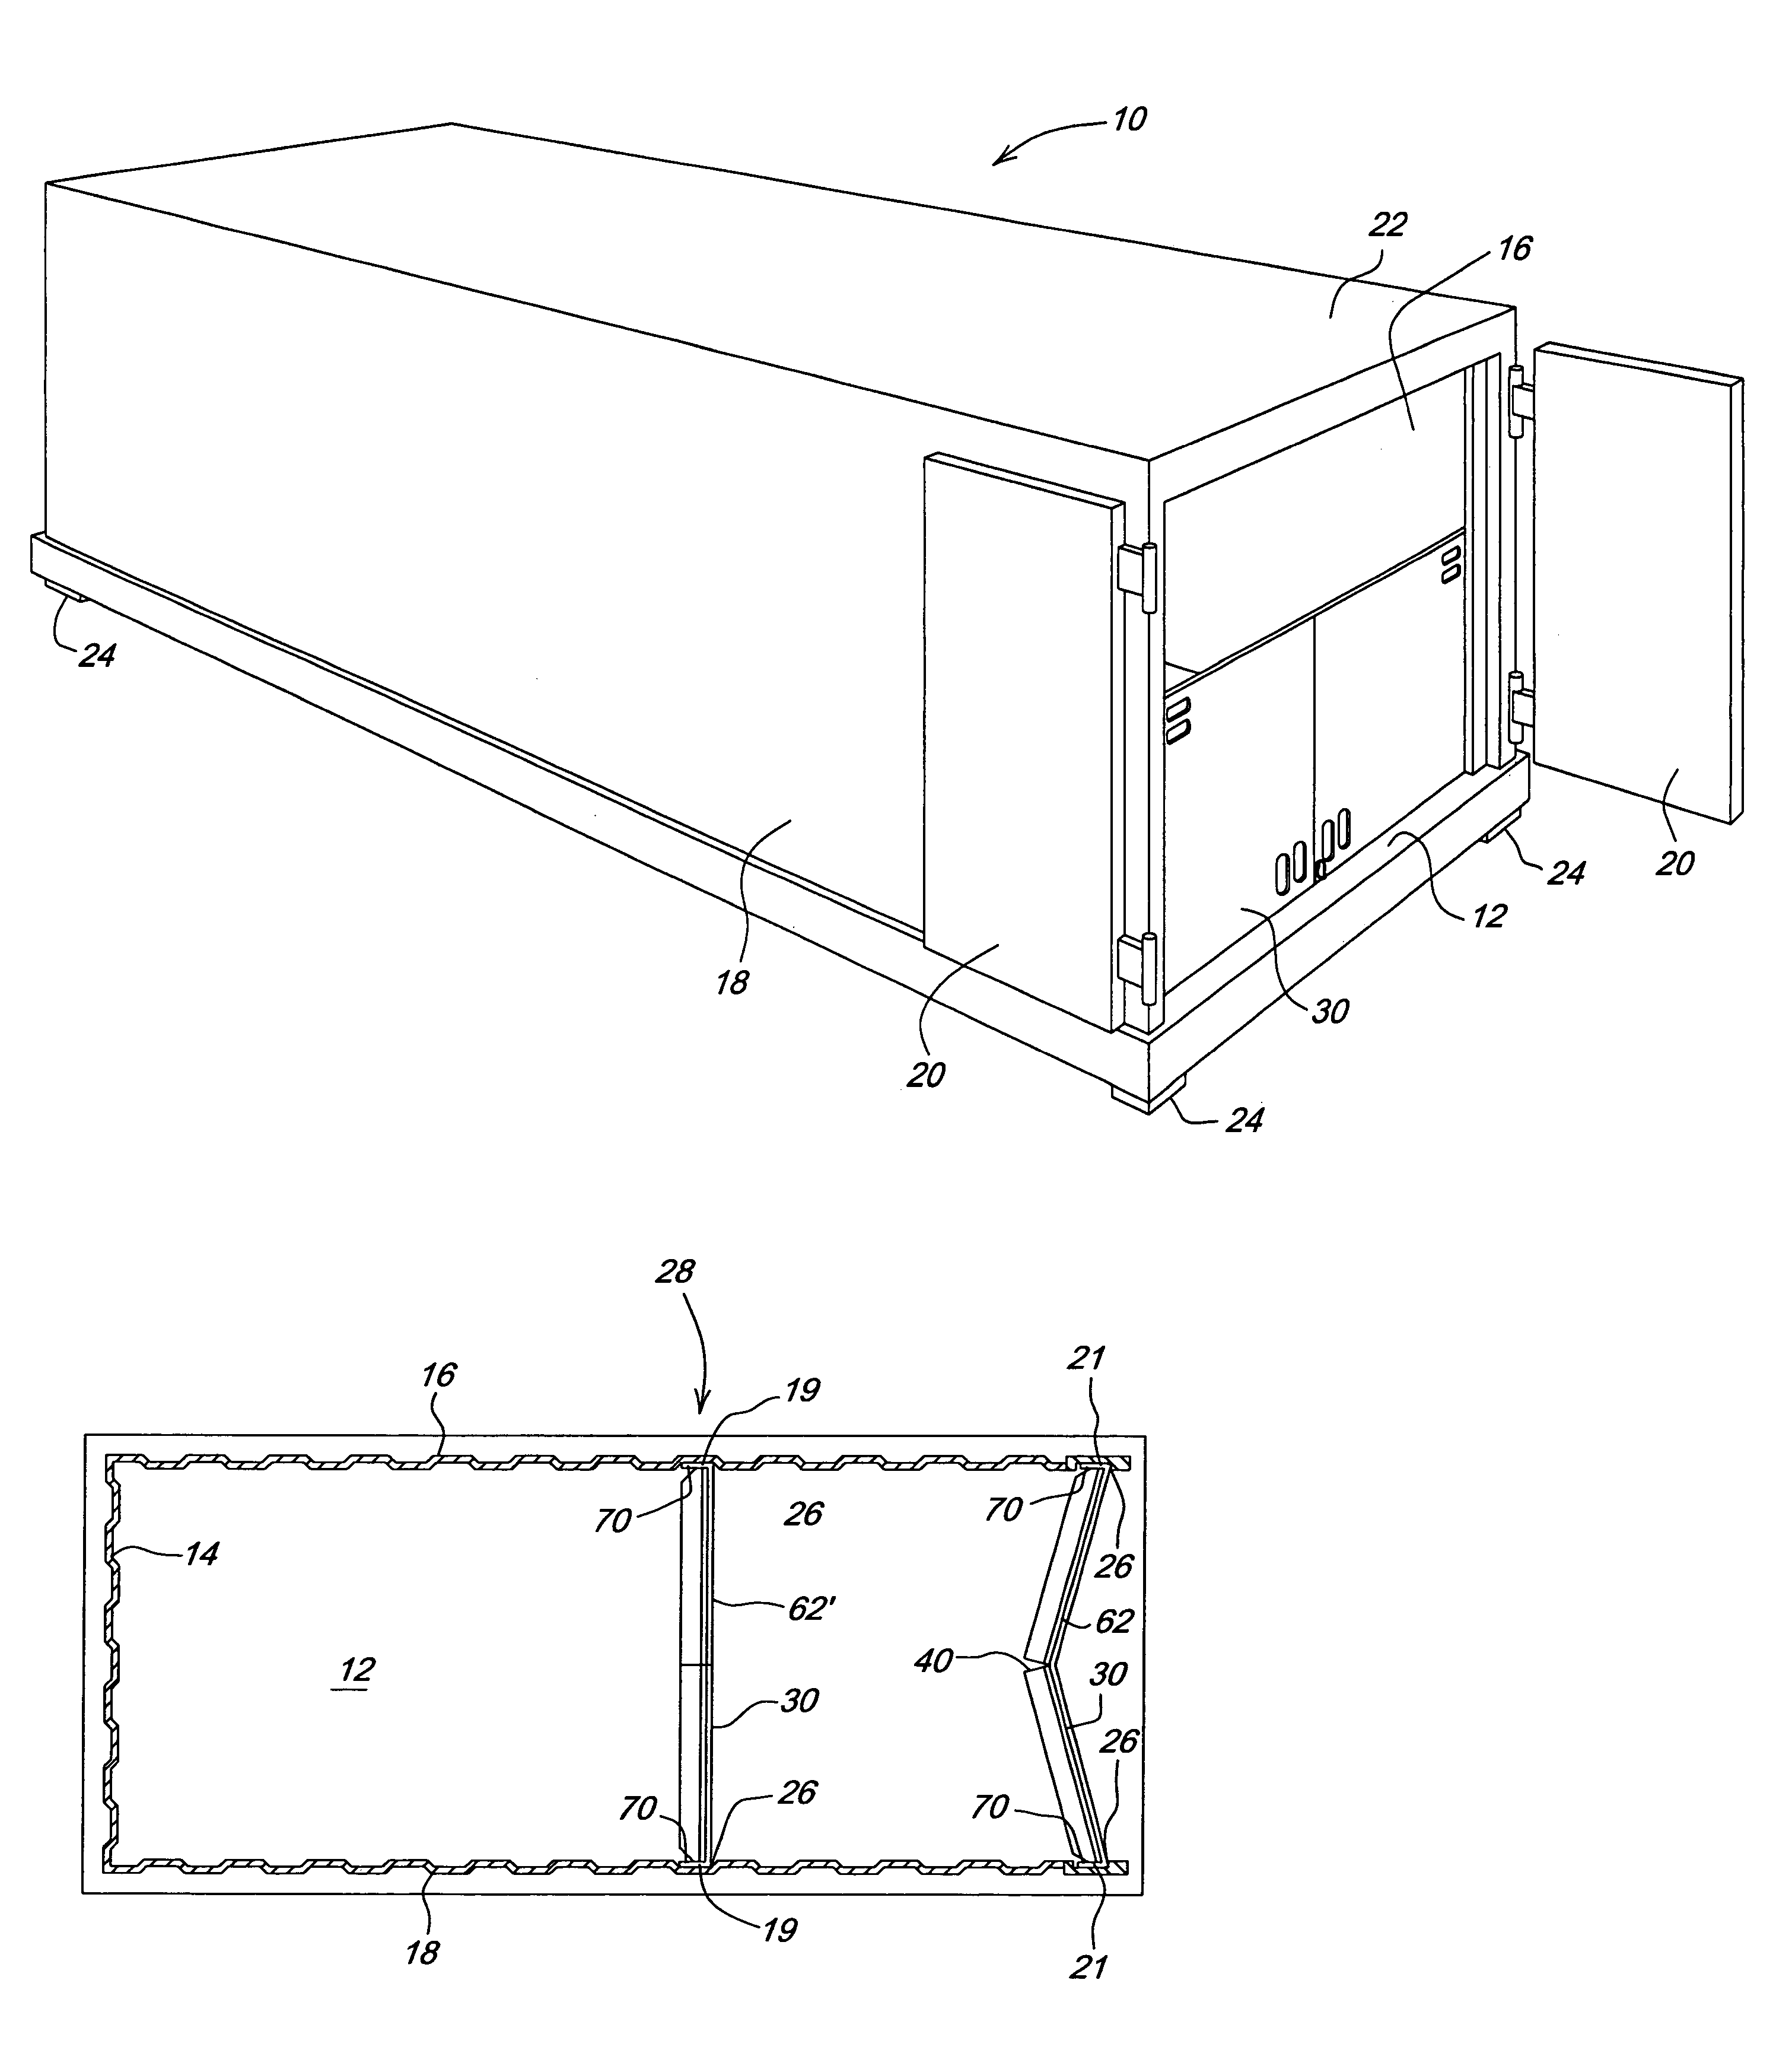 Foldable shipping container bulkhead